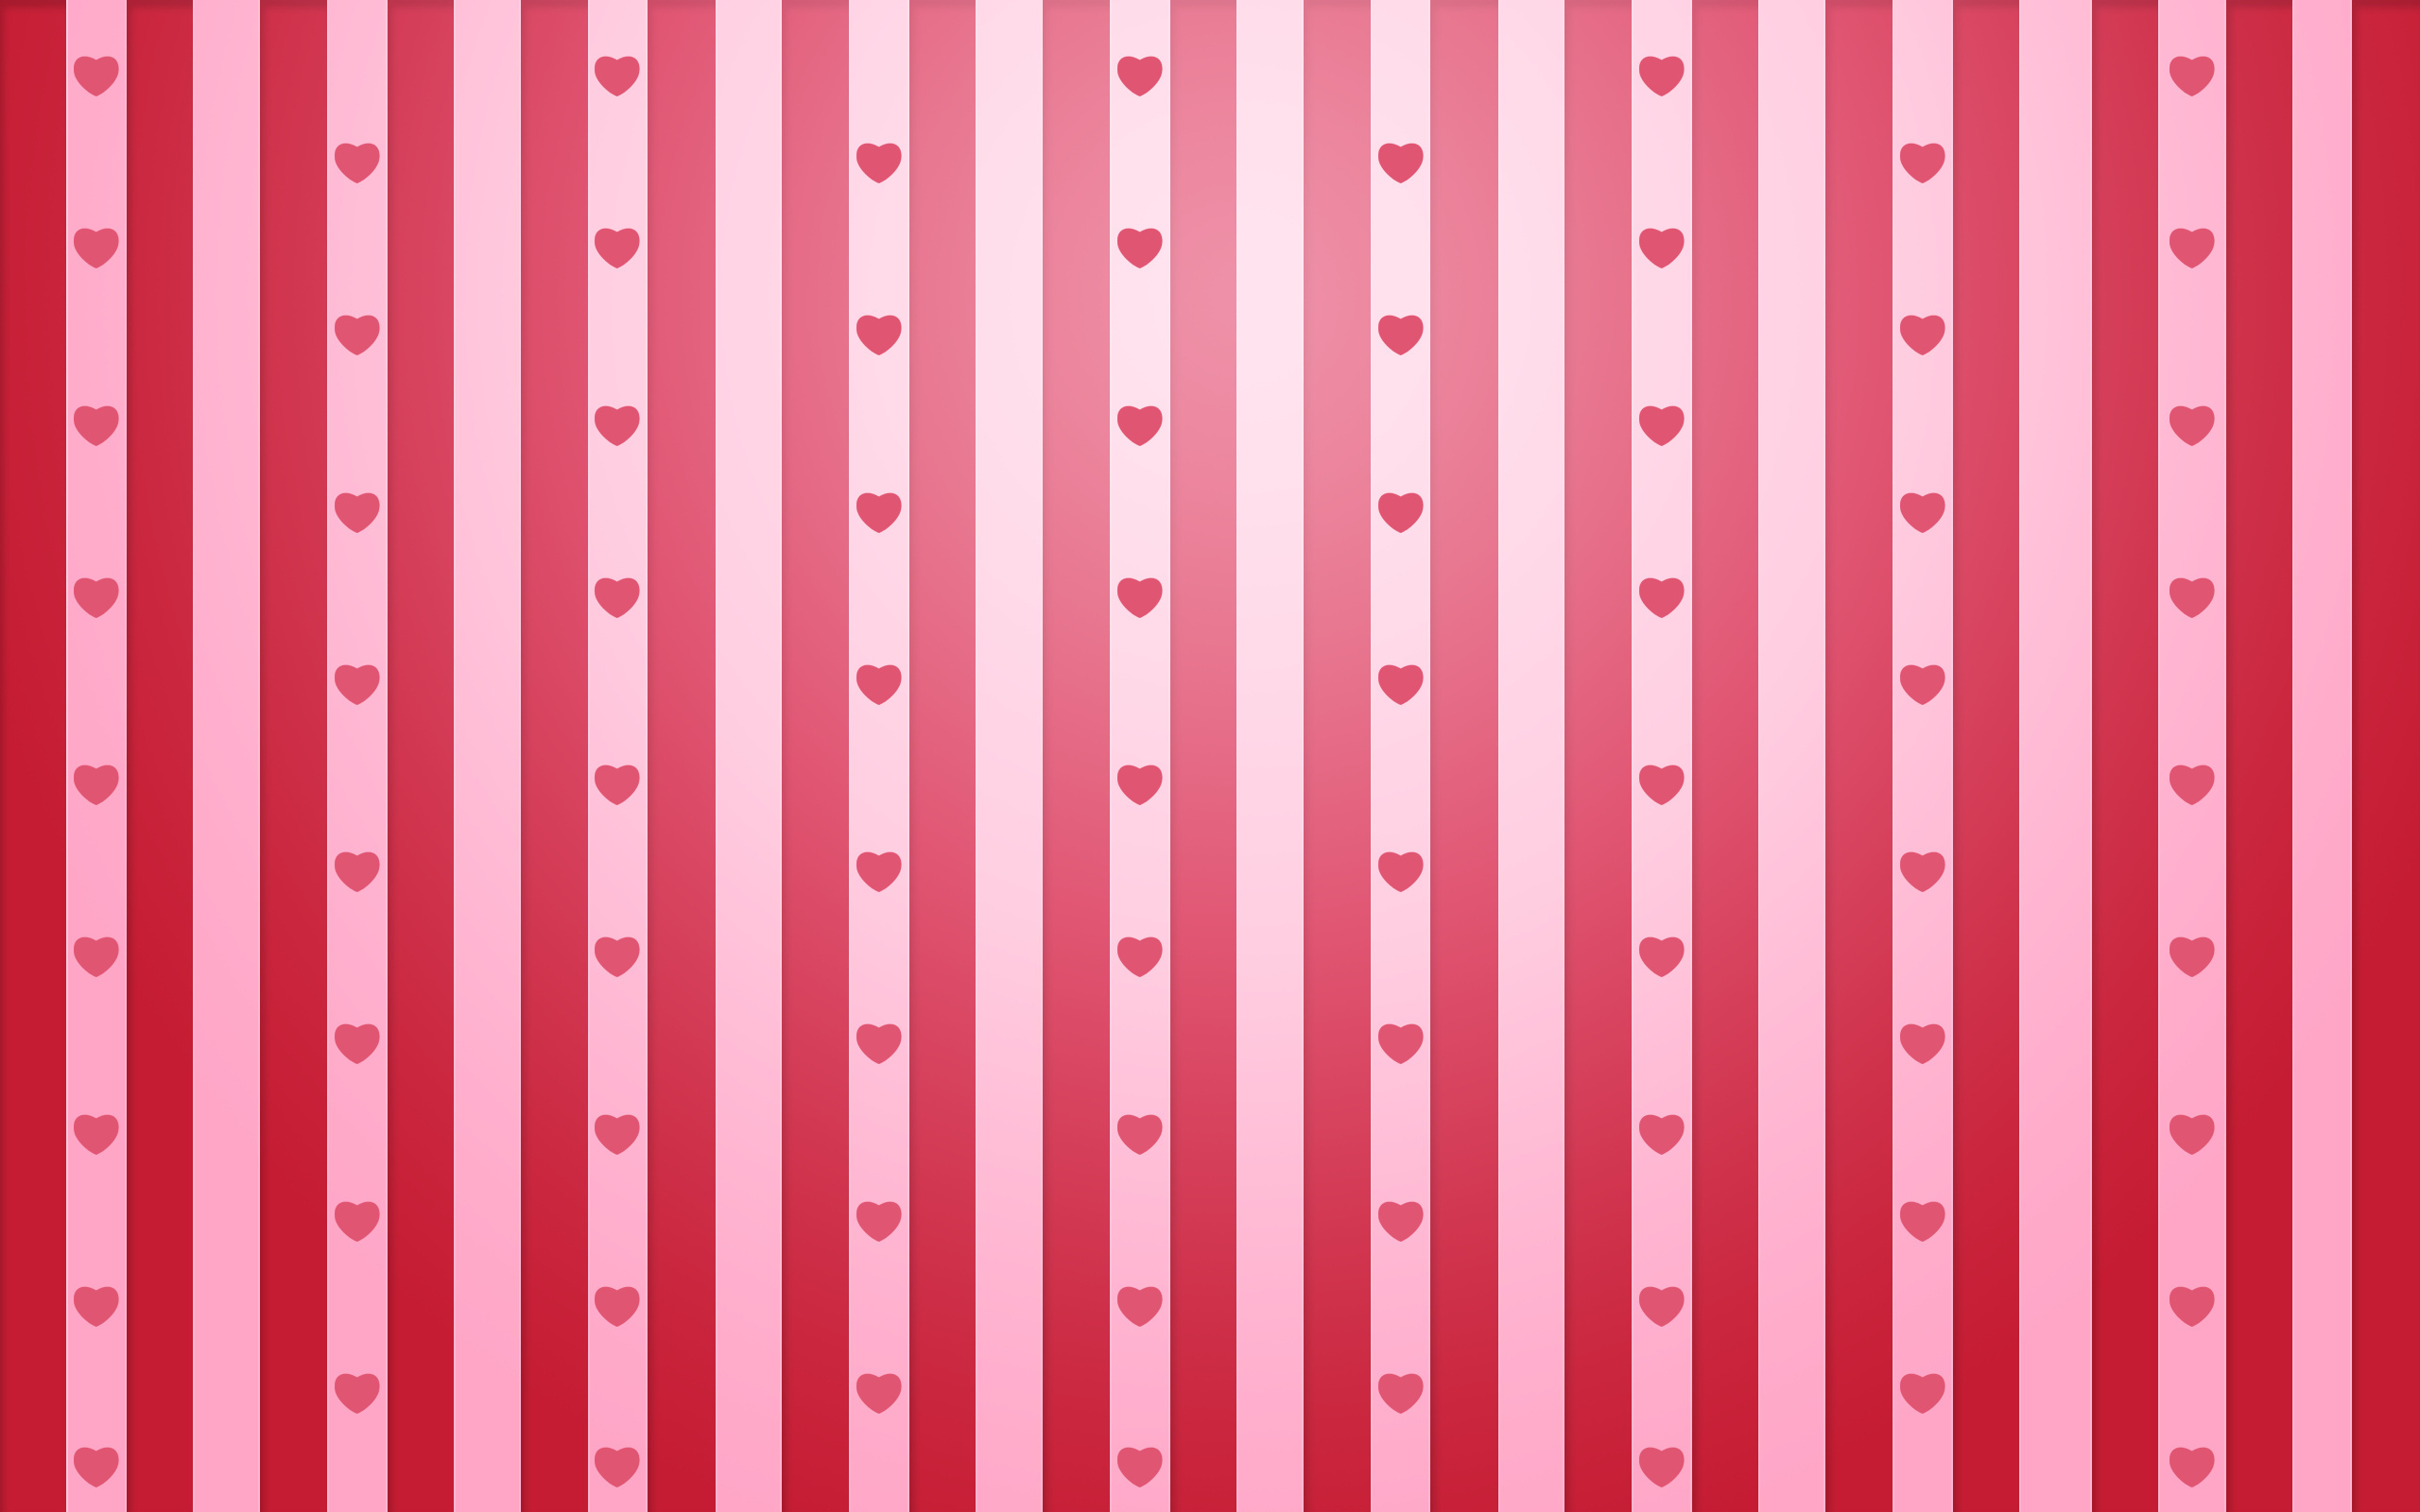 Pink hearts stripes